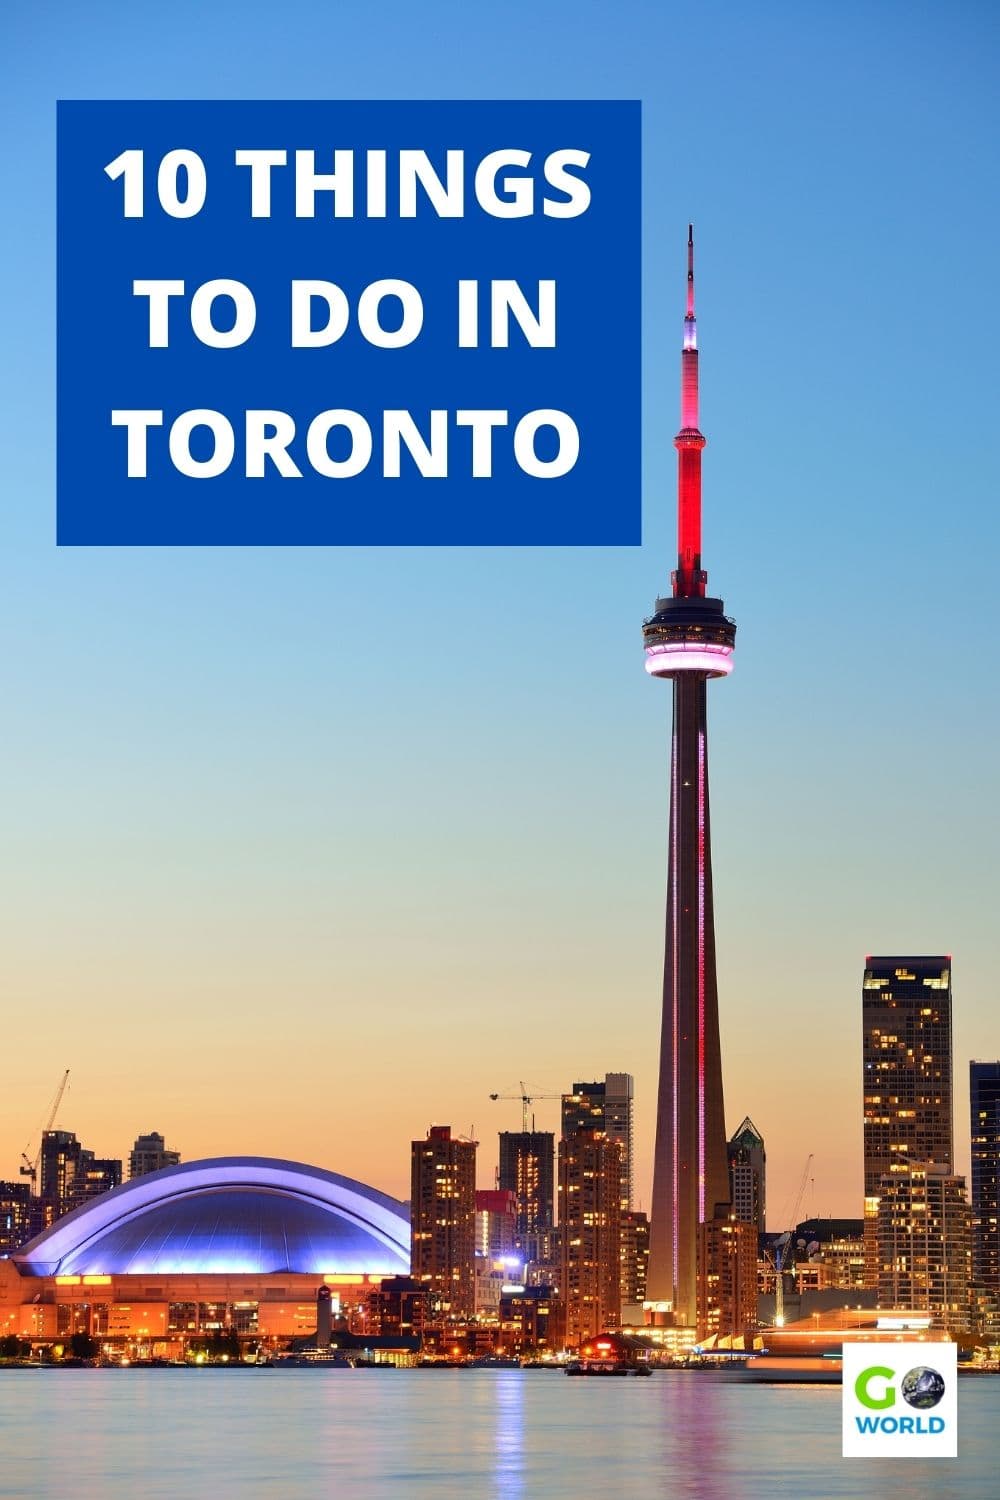 Make the most out of your trip to Canada's largest city with these top 10 things to do in Toronto including CN Tower and Niagra Falls. #torontoontario  #thingstodointoronto